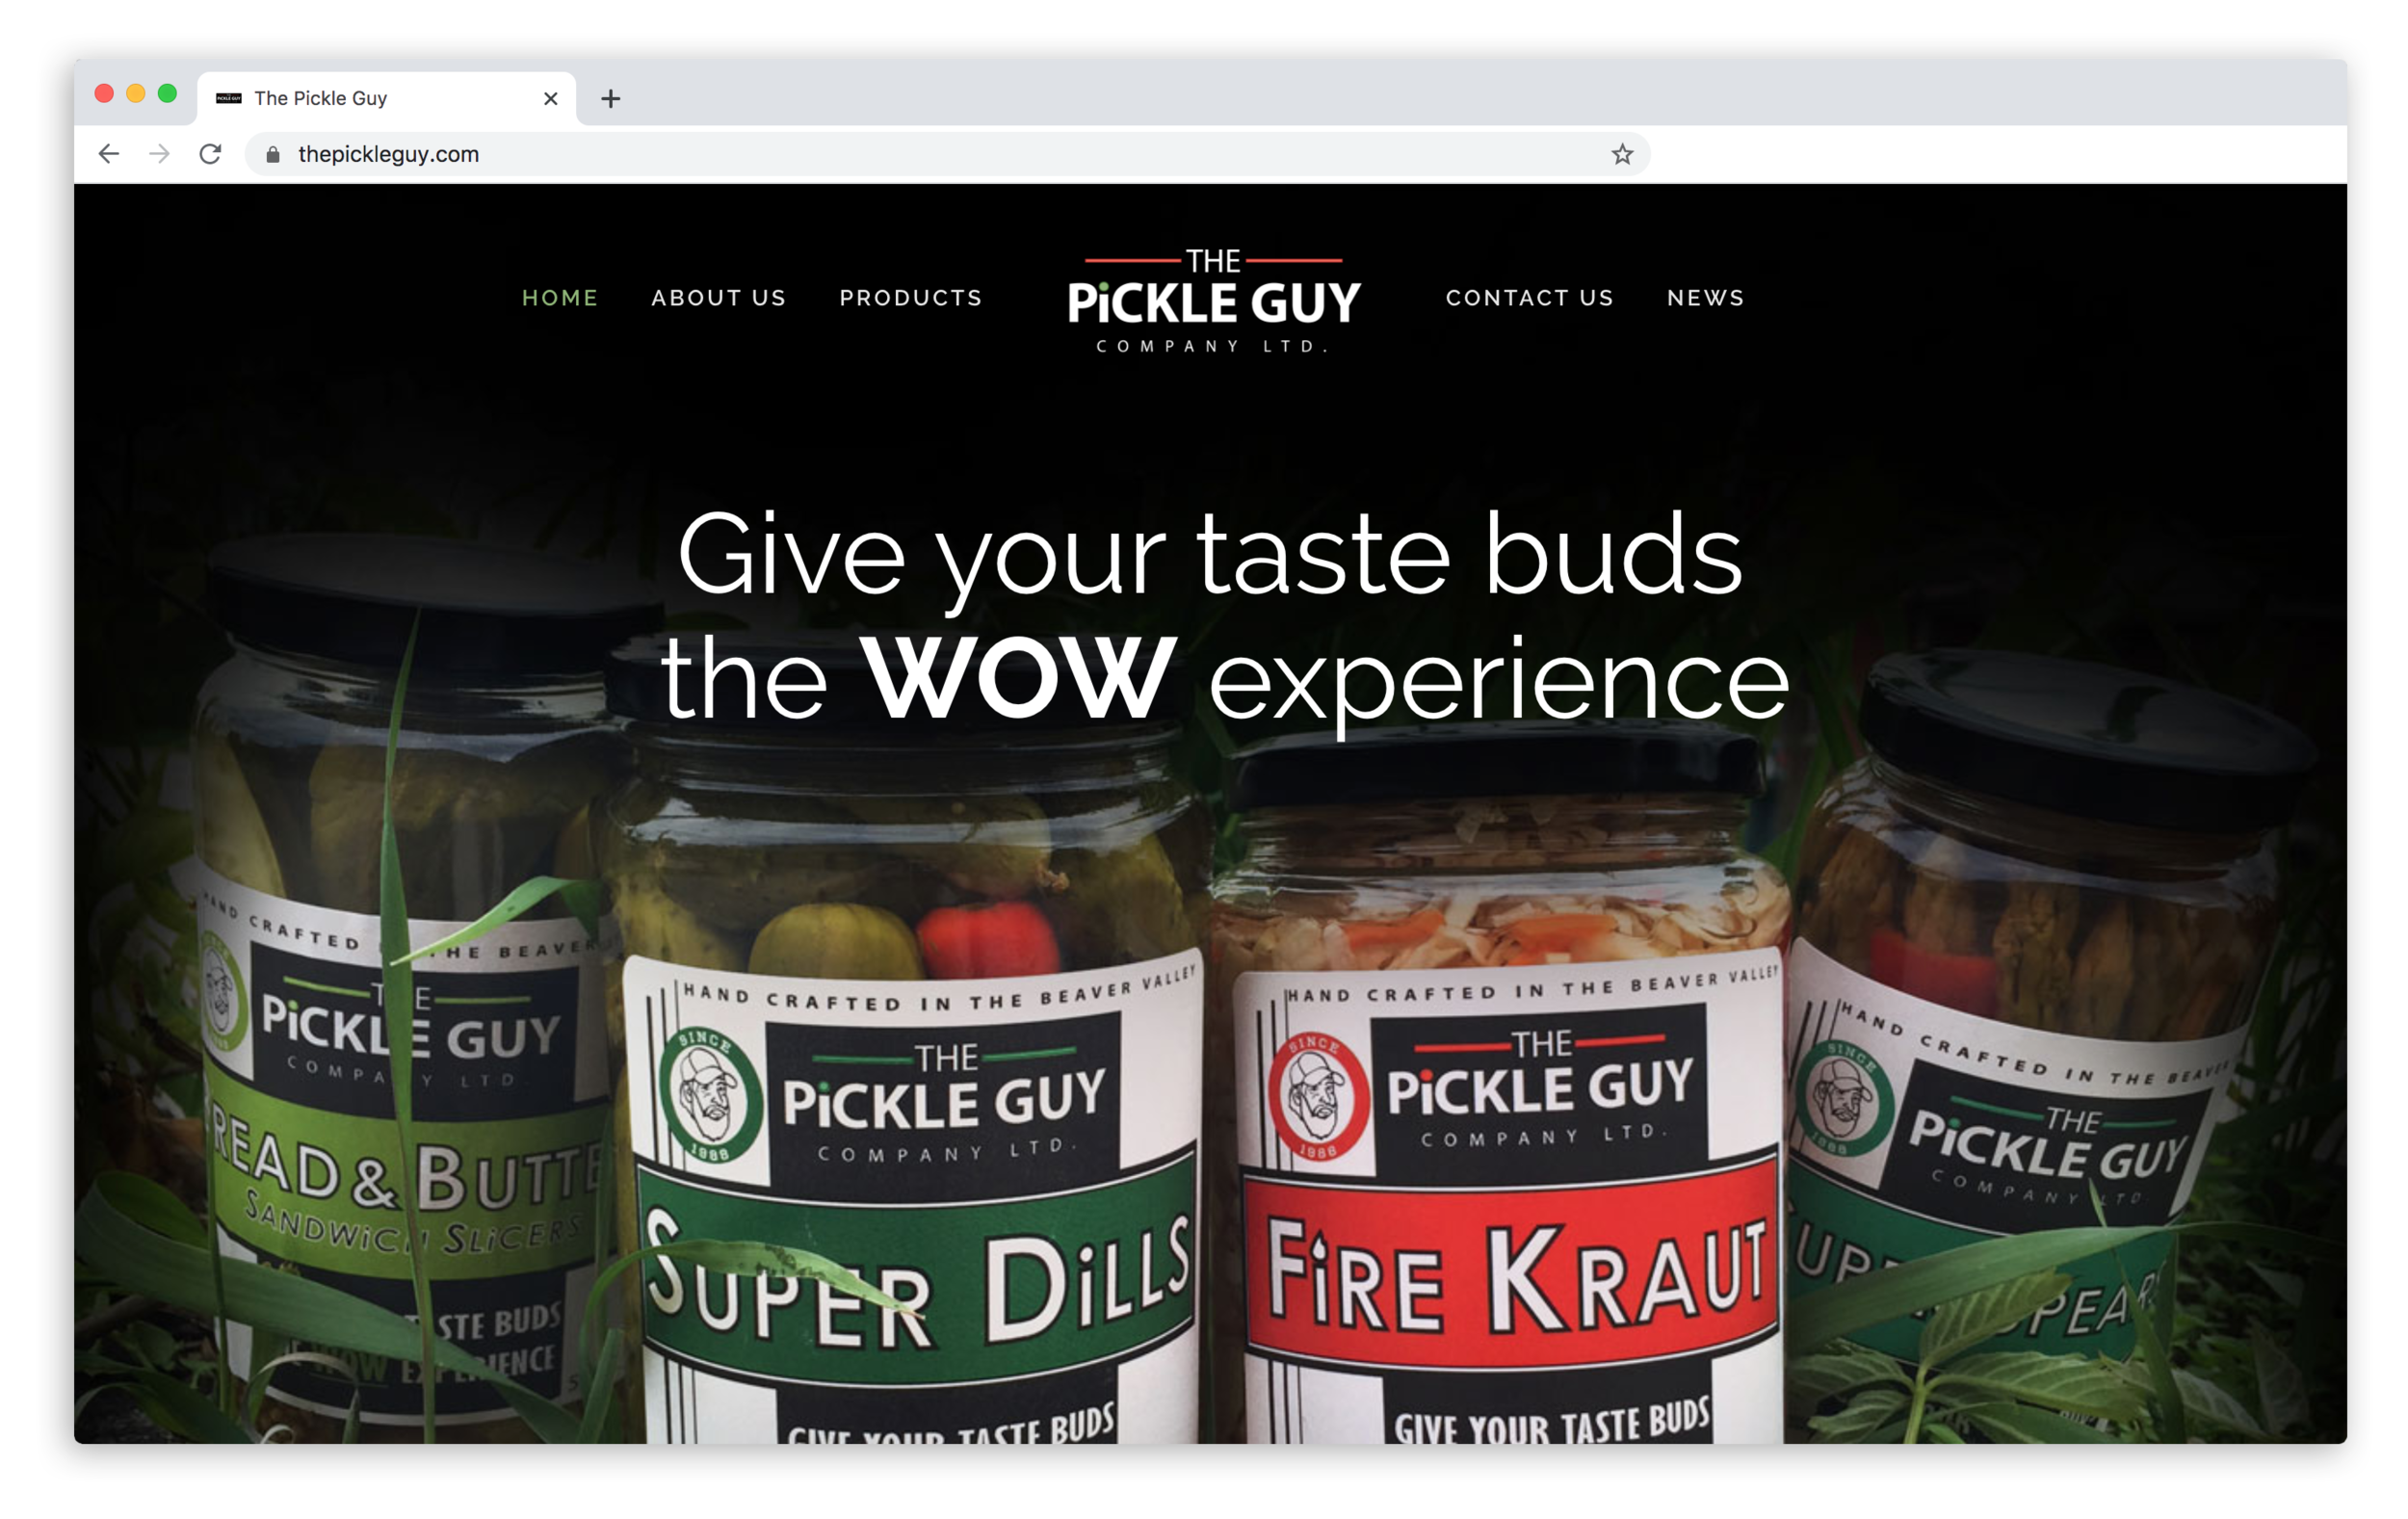 Products - That Pickle Guy